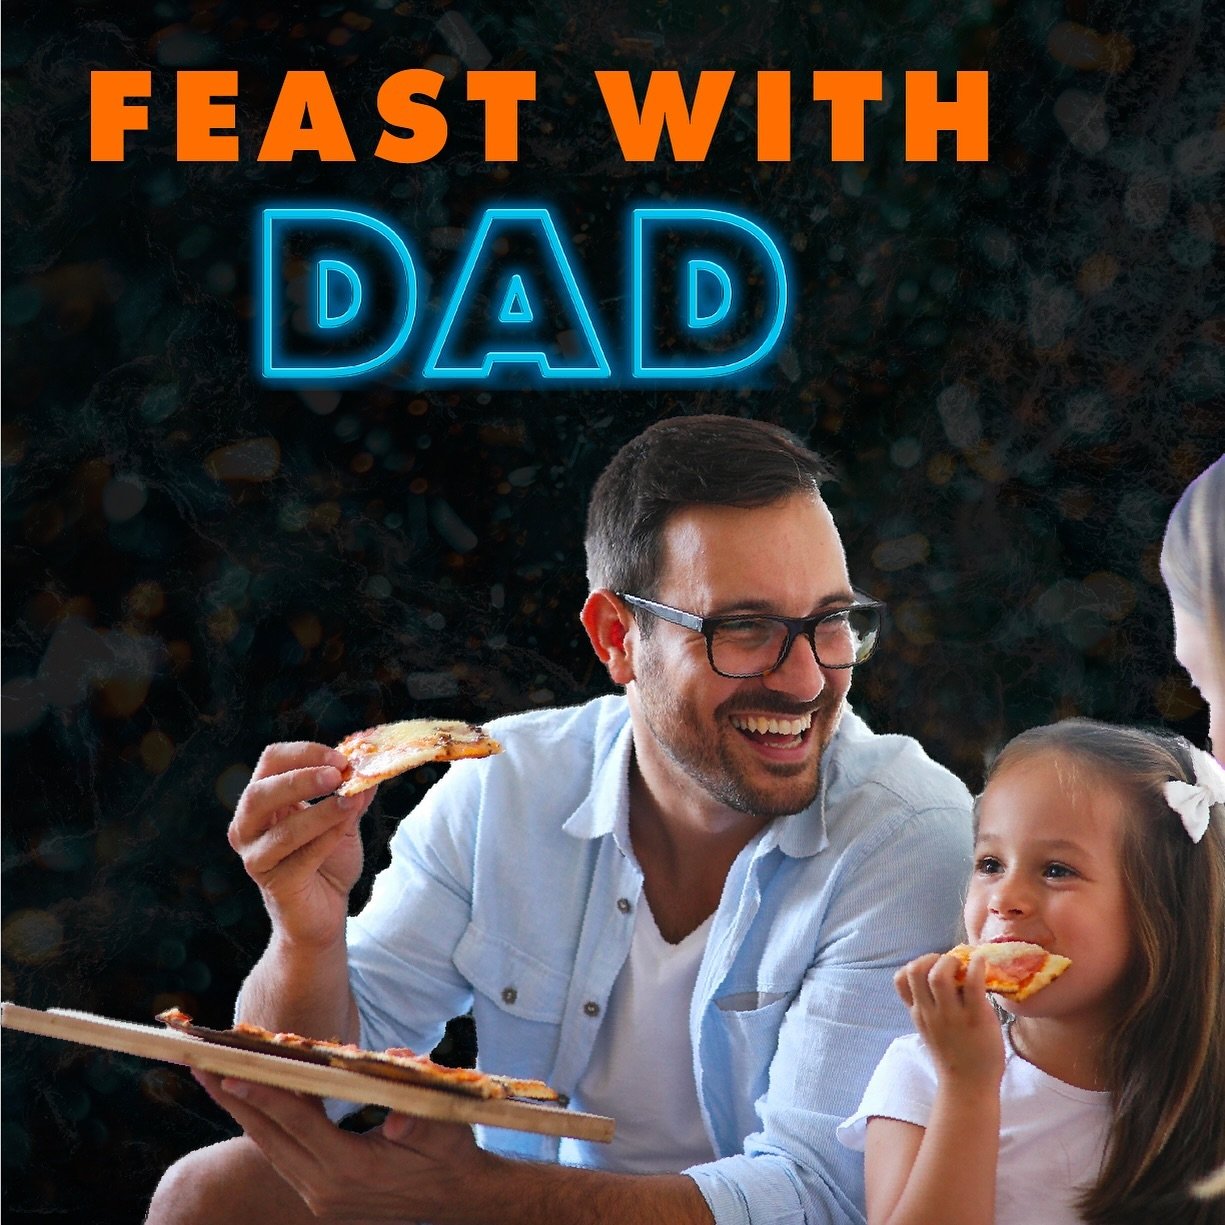 🍕FEAST with Dad! (VIP pass at ArnoldsFFC.com)

Feed the whole family with the &ldquo;Feed The Family&rdquo; deal available all party long on June 16th! just $38!

This package includes:

16&rdquo; Cheese Pizza
BBQ Boneless wings
Large Fries
Pitcher 